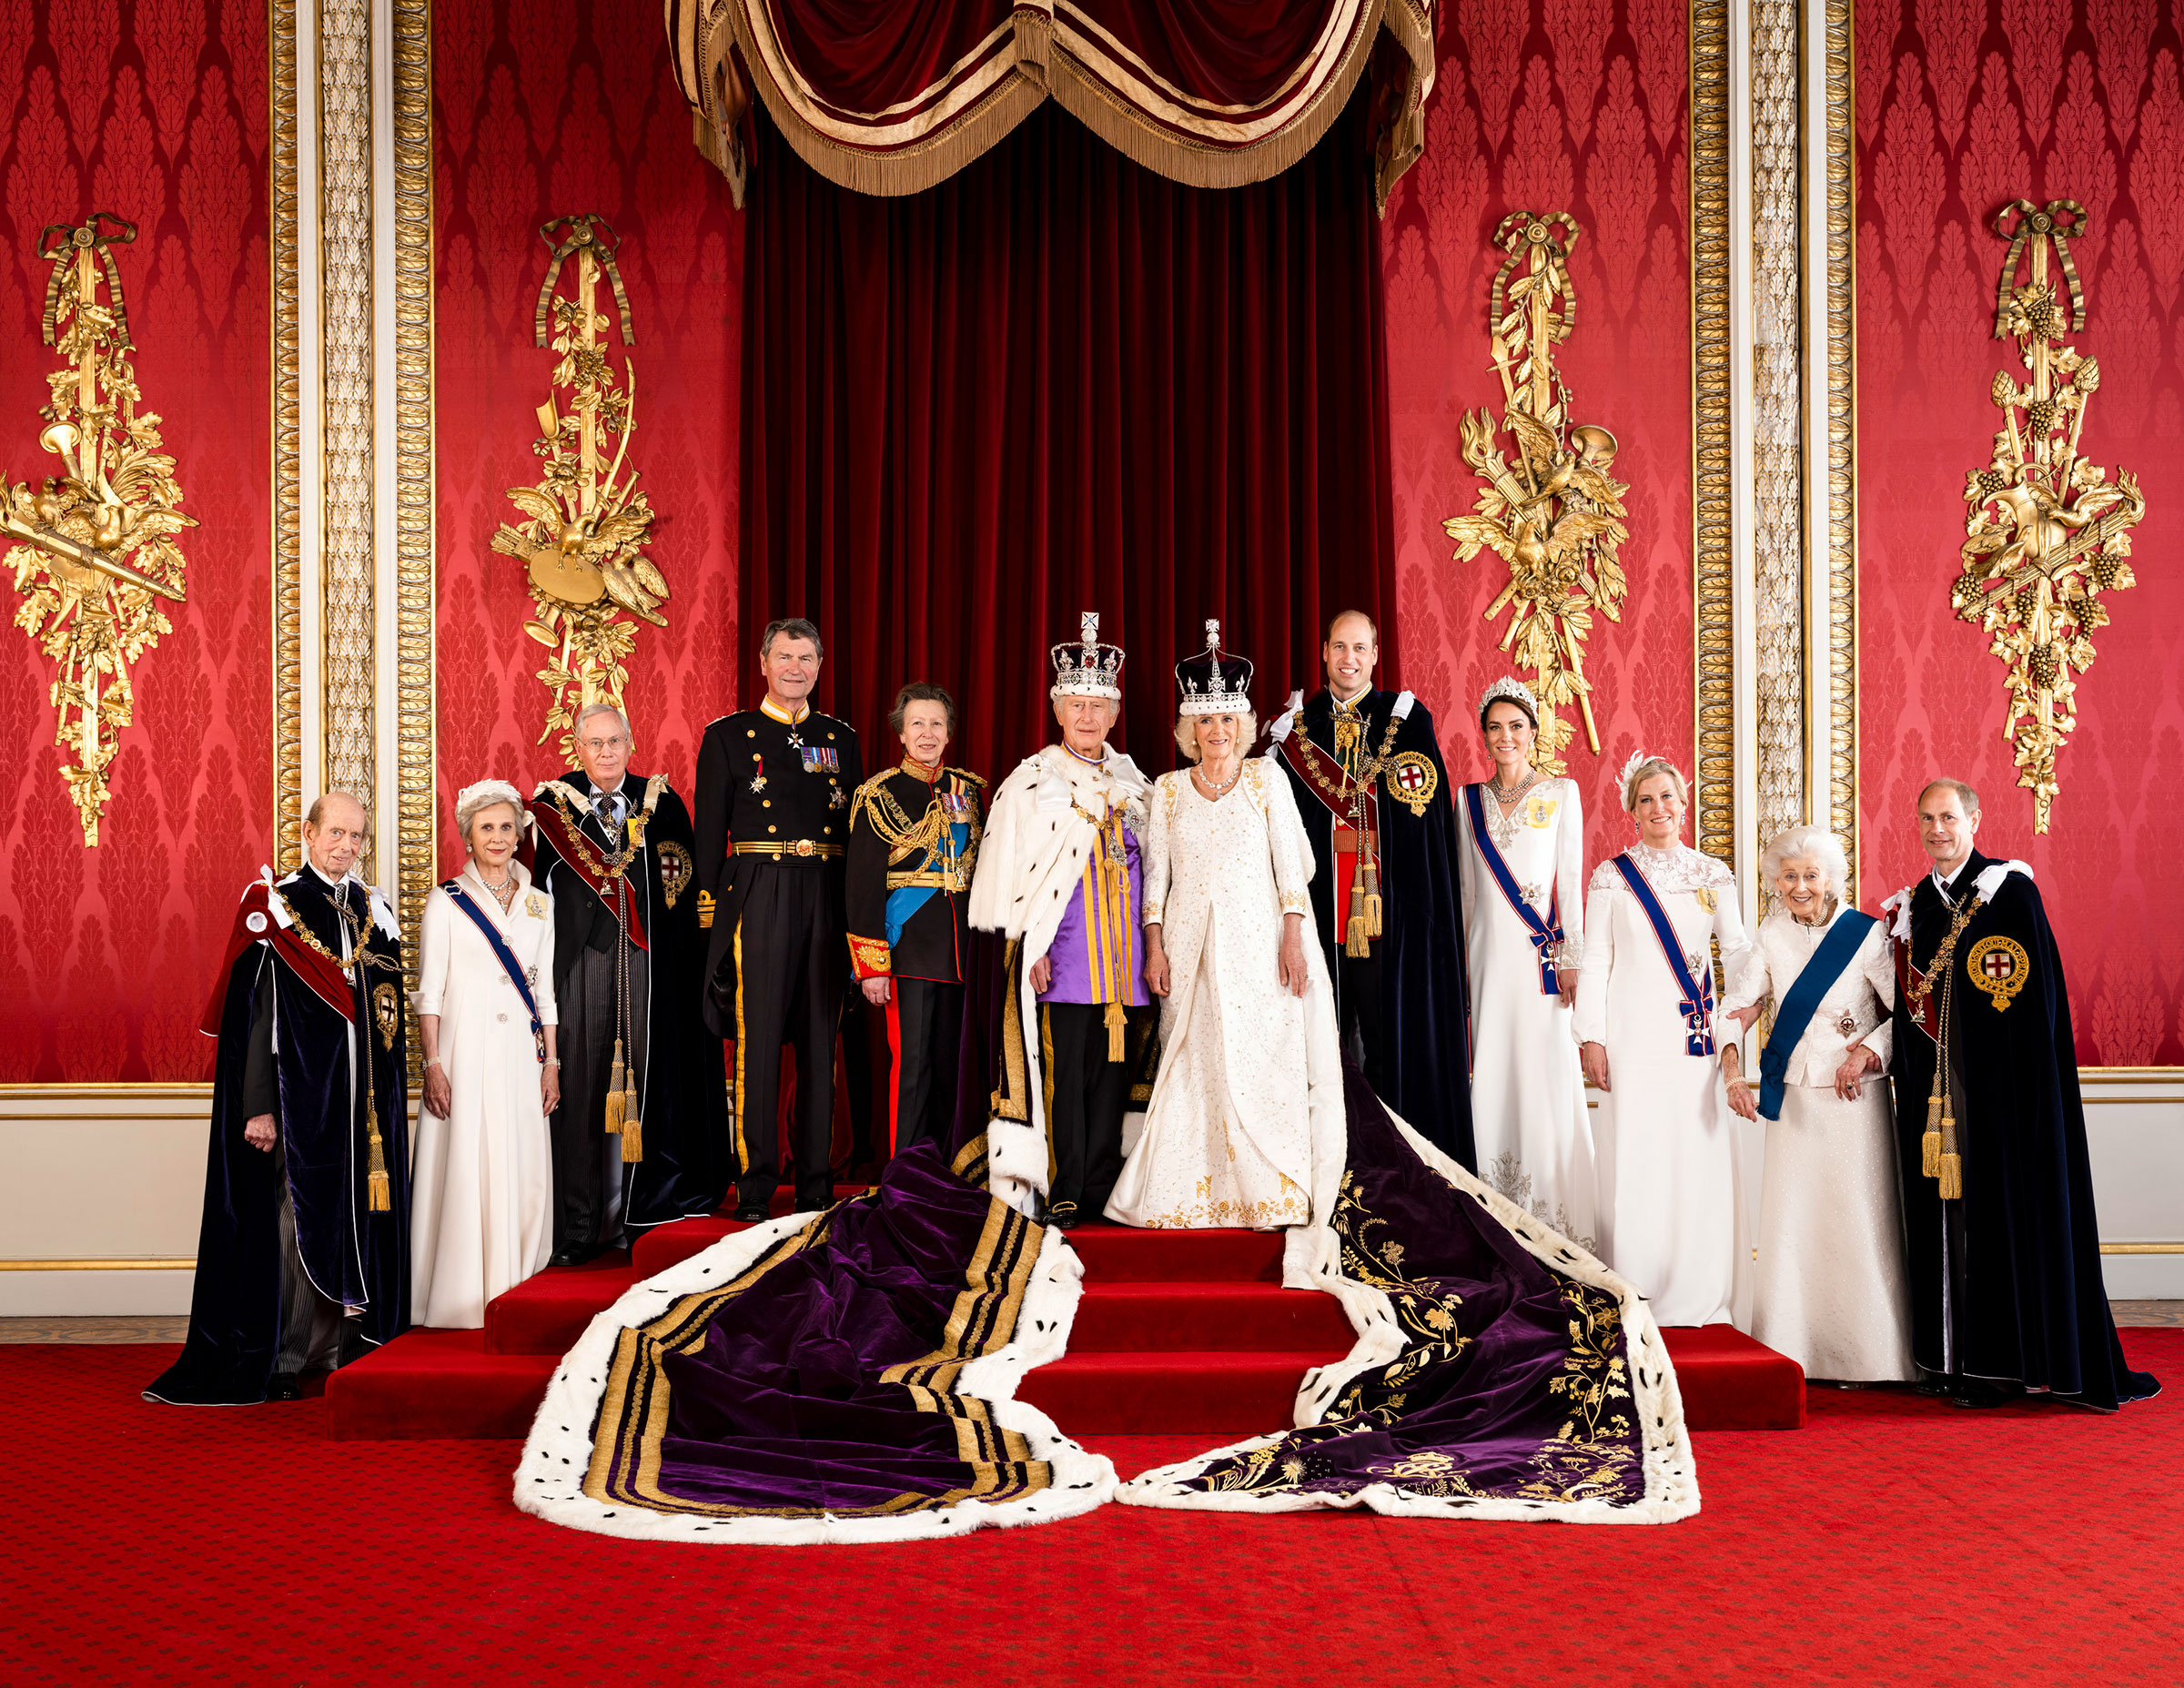 King Charles III and Queen Camilla are pictured with members of the working royal family: (L-R) Prince Edward, Duke of Kent, Birgitte, Duchess of Gloucester, Prince Richard, Duke of Gloucester, Vice Admiral Sir Tim Laurence, Anne, Princess Royal, King Charles III, Queen Camilla, The Prince of Wales, Catherine, Princess of Wales, Sophie, Duchess of Edinburgh, Princess Alexandra, The Honourable Lady Ogilvy and Prince Edward, Duke of Edinburgh. (Hugo Burnand—Buckingham Palace/Getty Images)